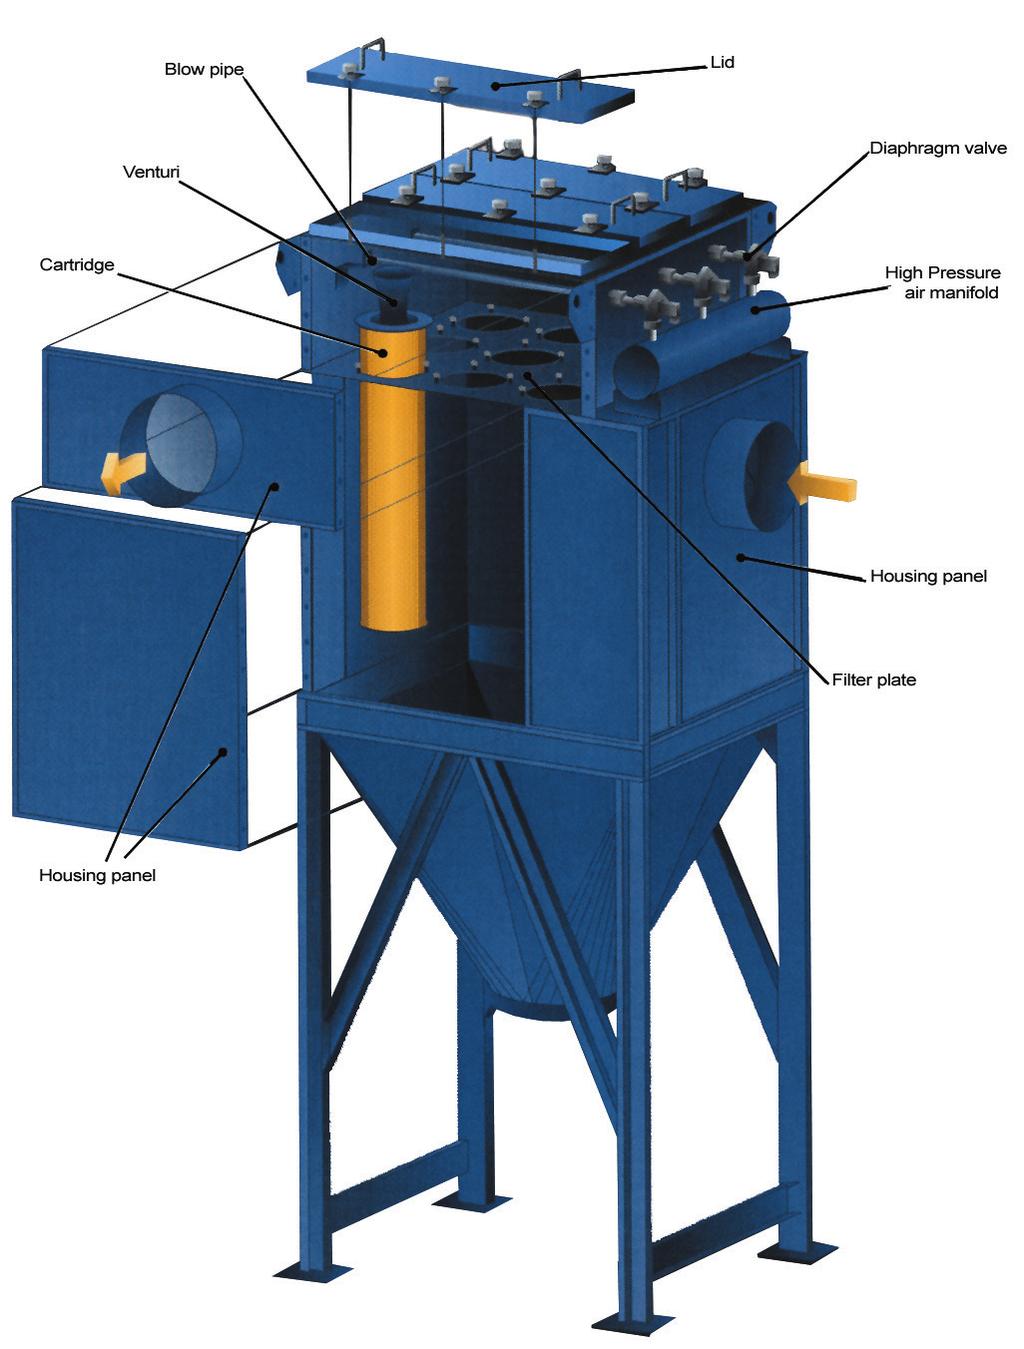 MORE DUST COLLECTION PRODUCTS The HCP-325 Range Reverse Pulse Fabric Dust Collector combines star-pleated filter technology with a dedicated reverse pulse cleaning system in a compact modular housing.